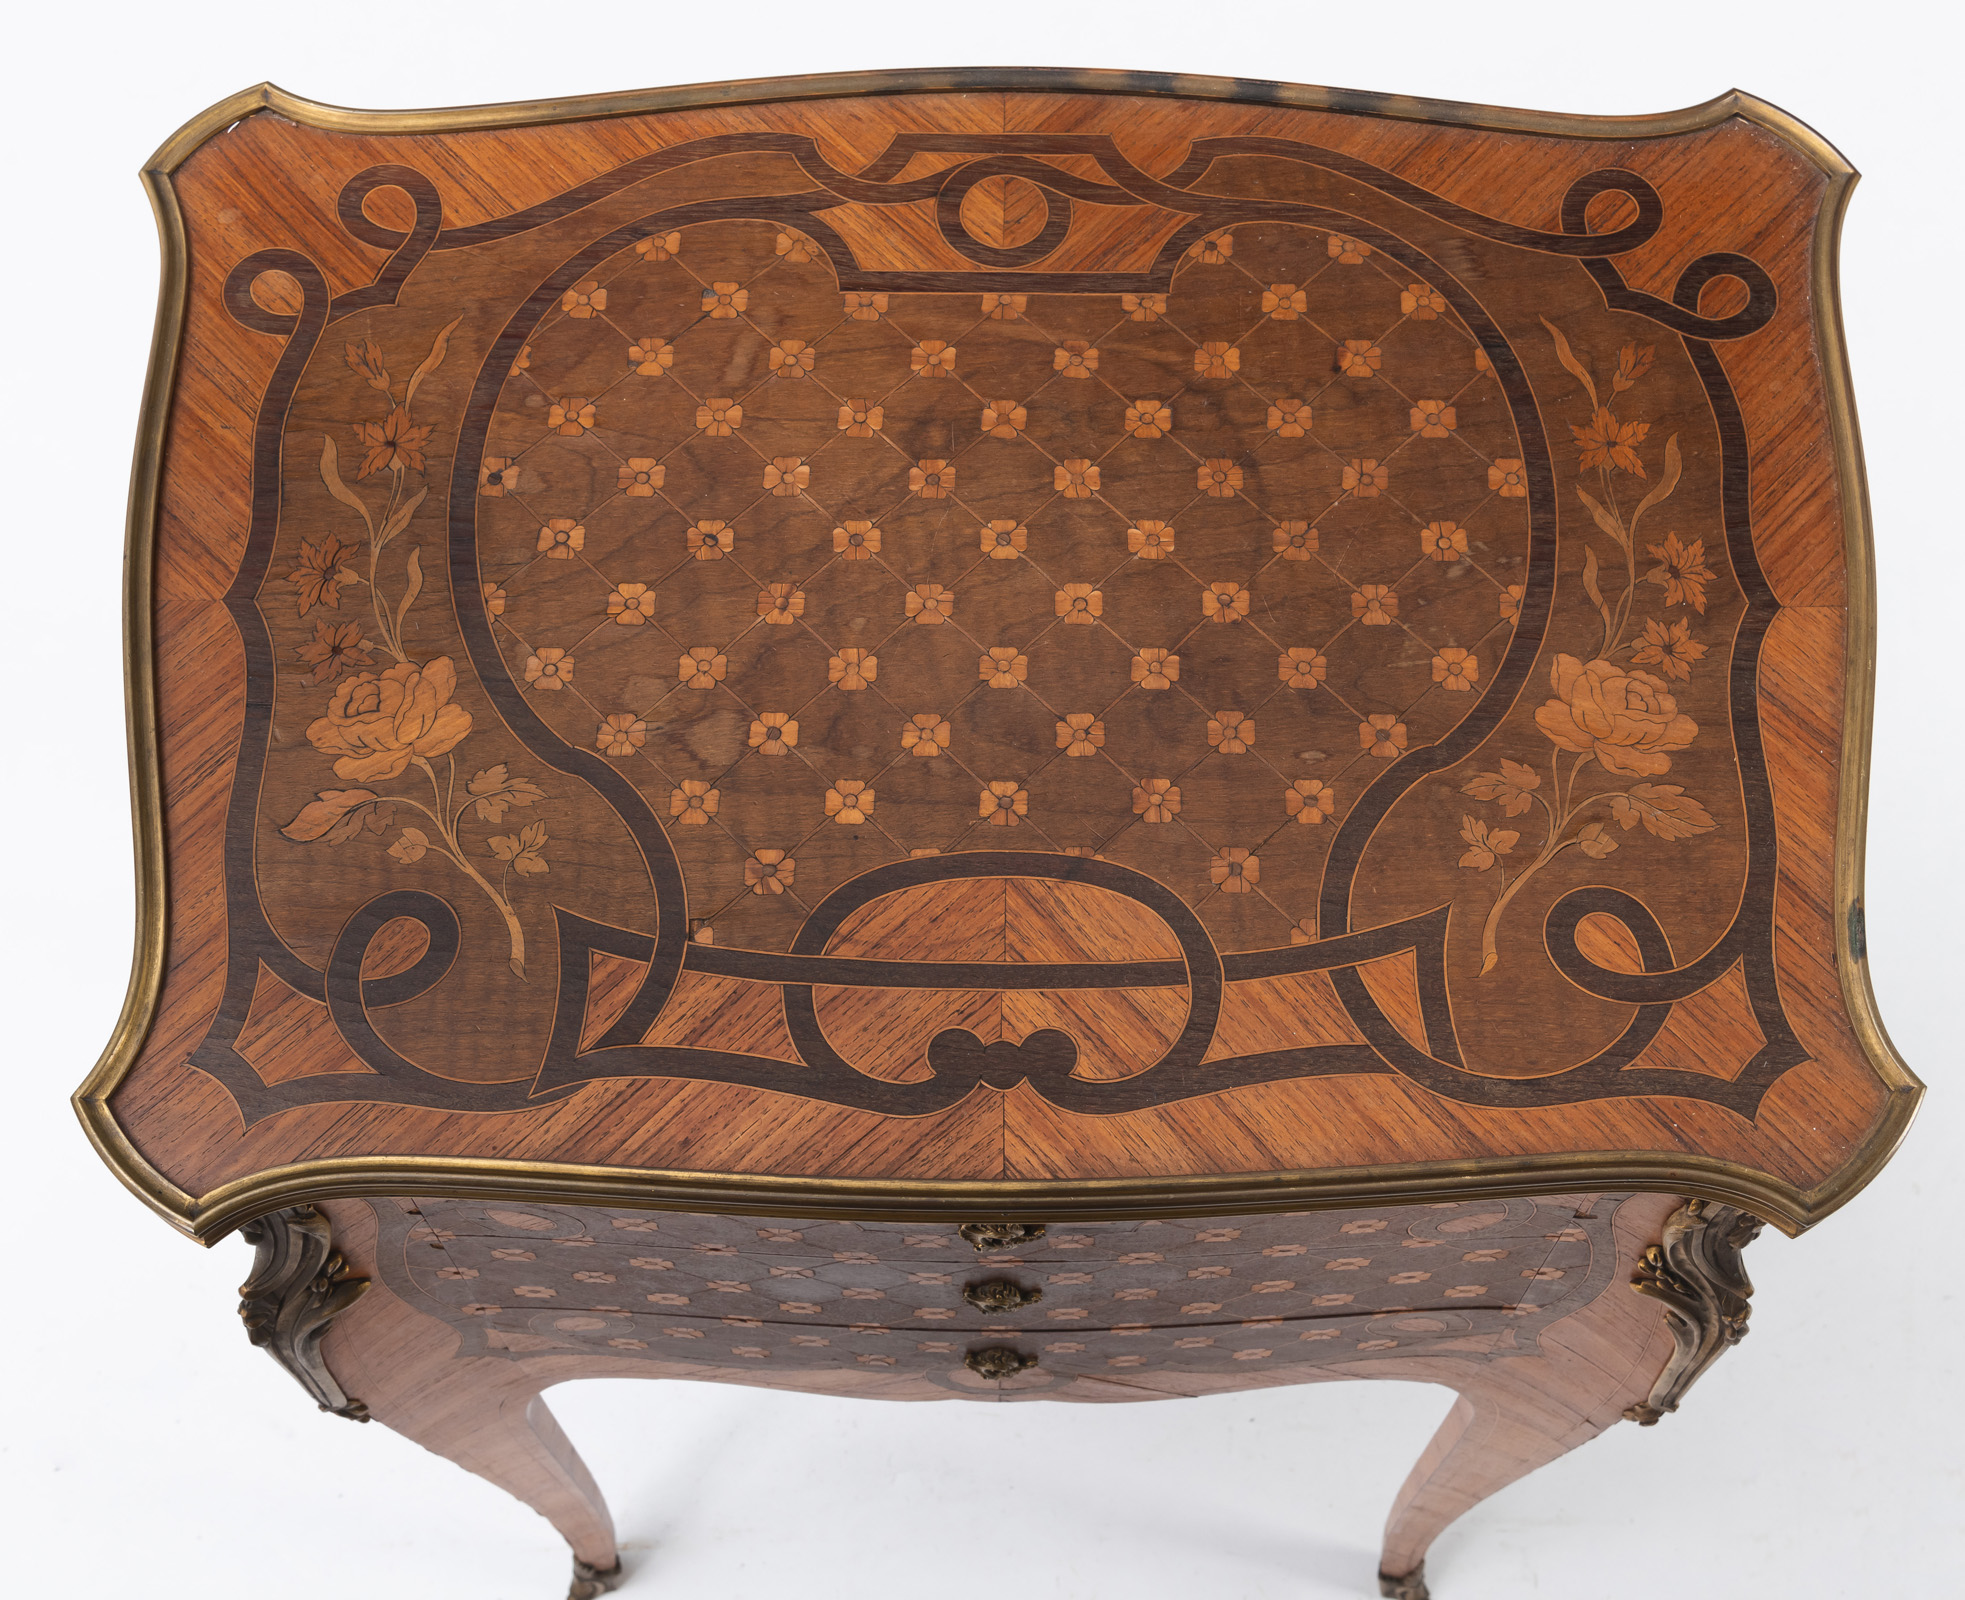 A LOUIS VI STYLE BRONZE MOUNTED PARTIAL EBONIZED KINGWOOD MARQUETRIED OCCASIONAL COMMODE - Image 7 of 7